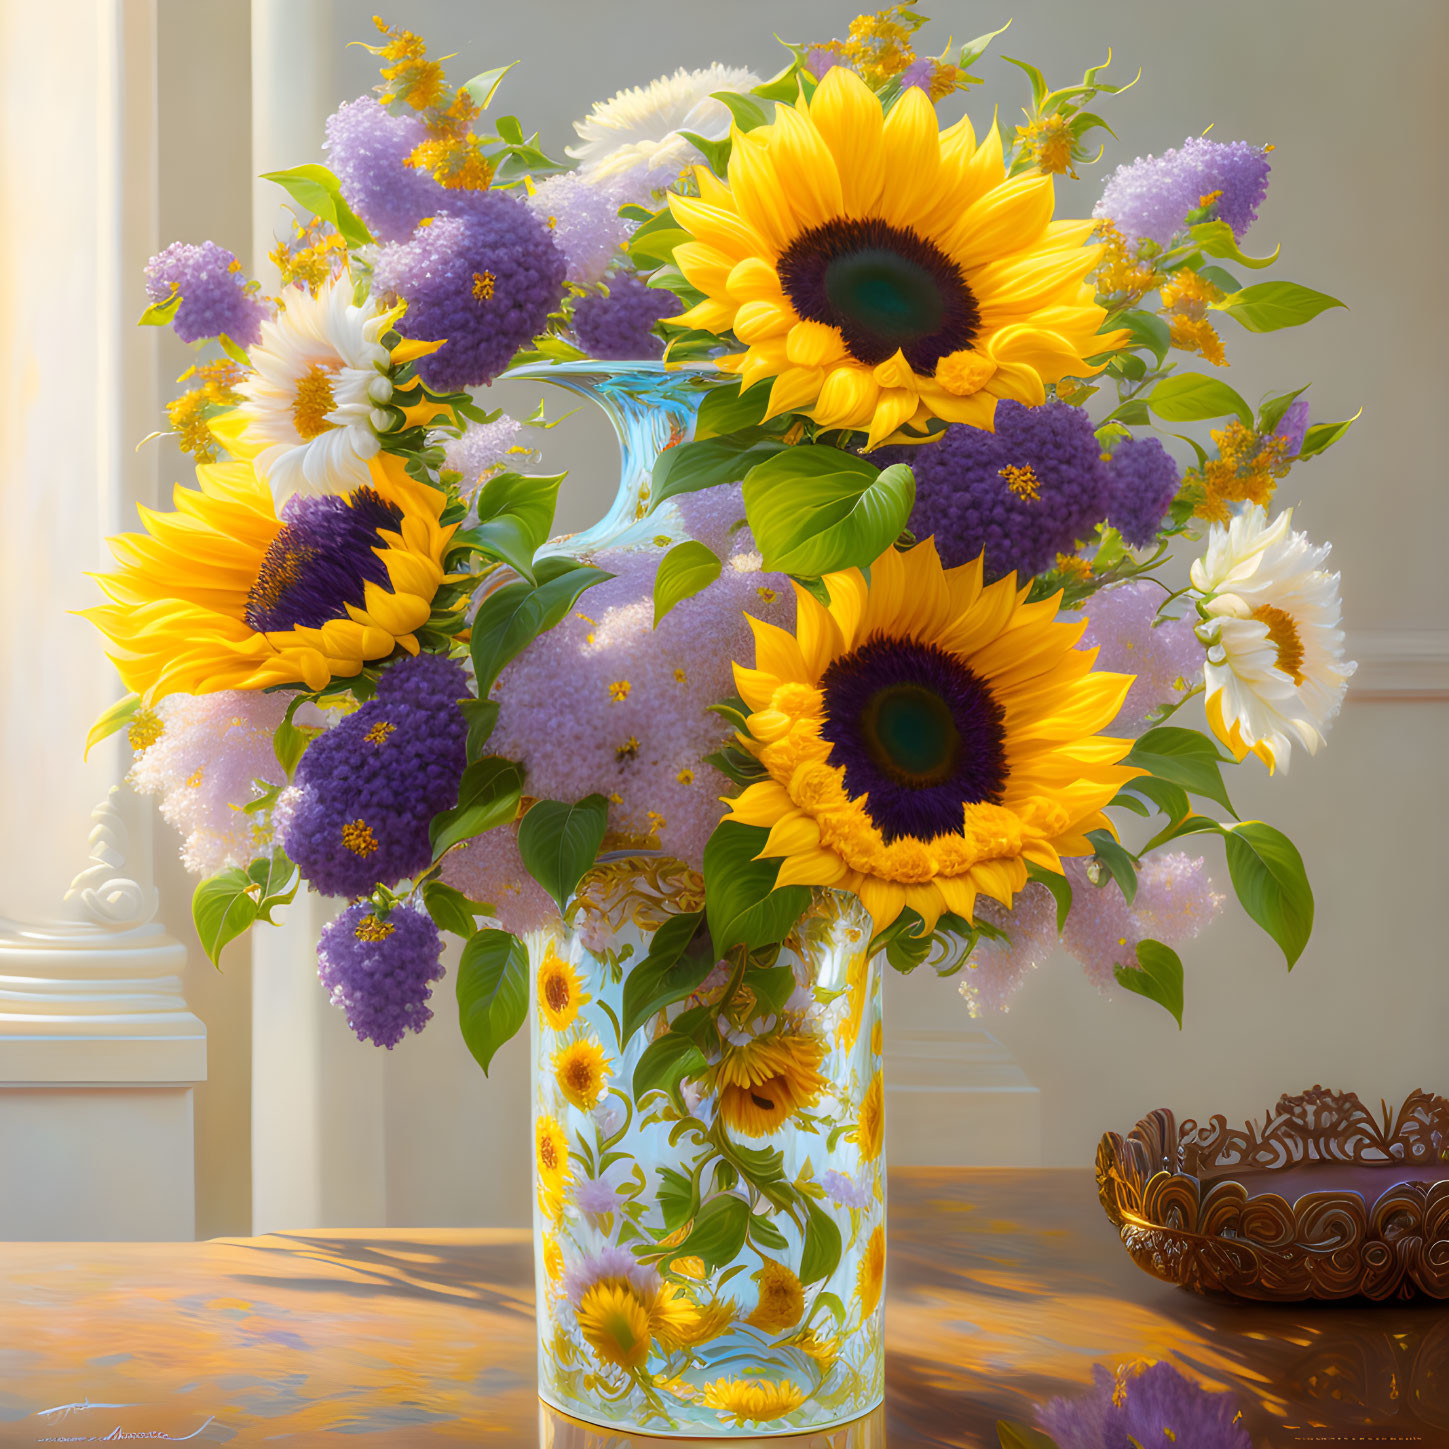 Sunflowers and Purple Flowers in Decorated Vase on Reflective Surface